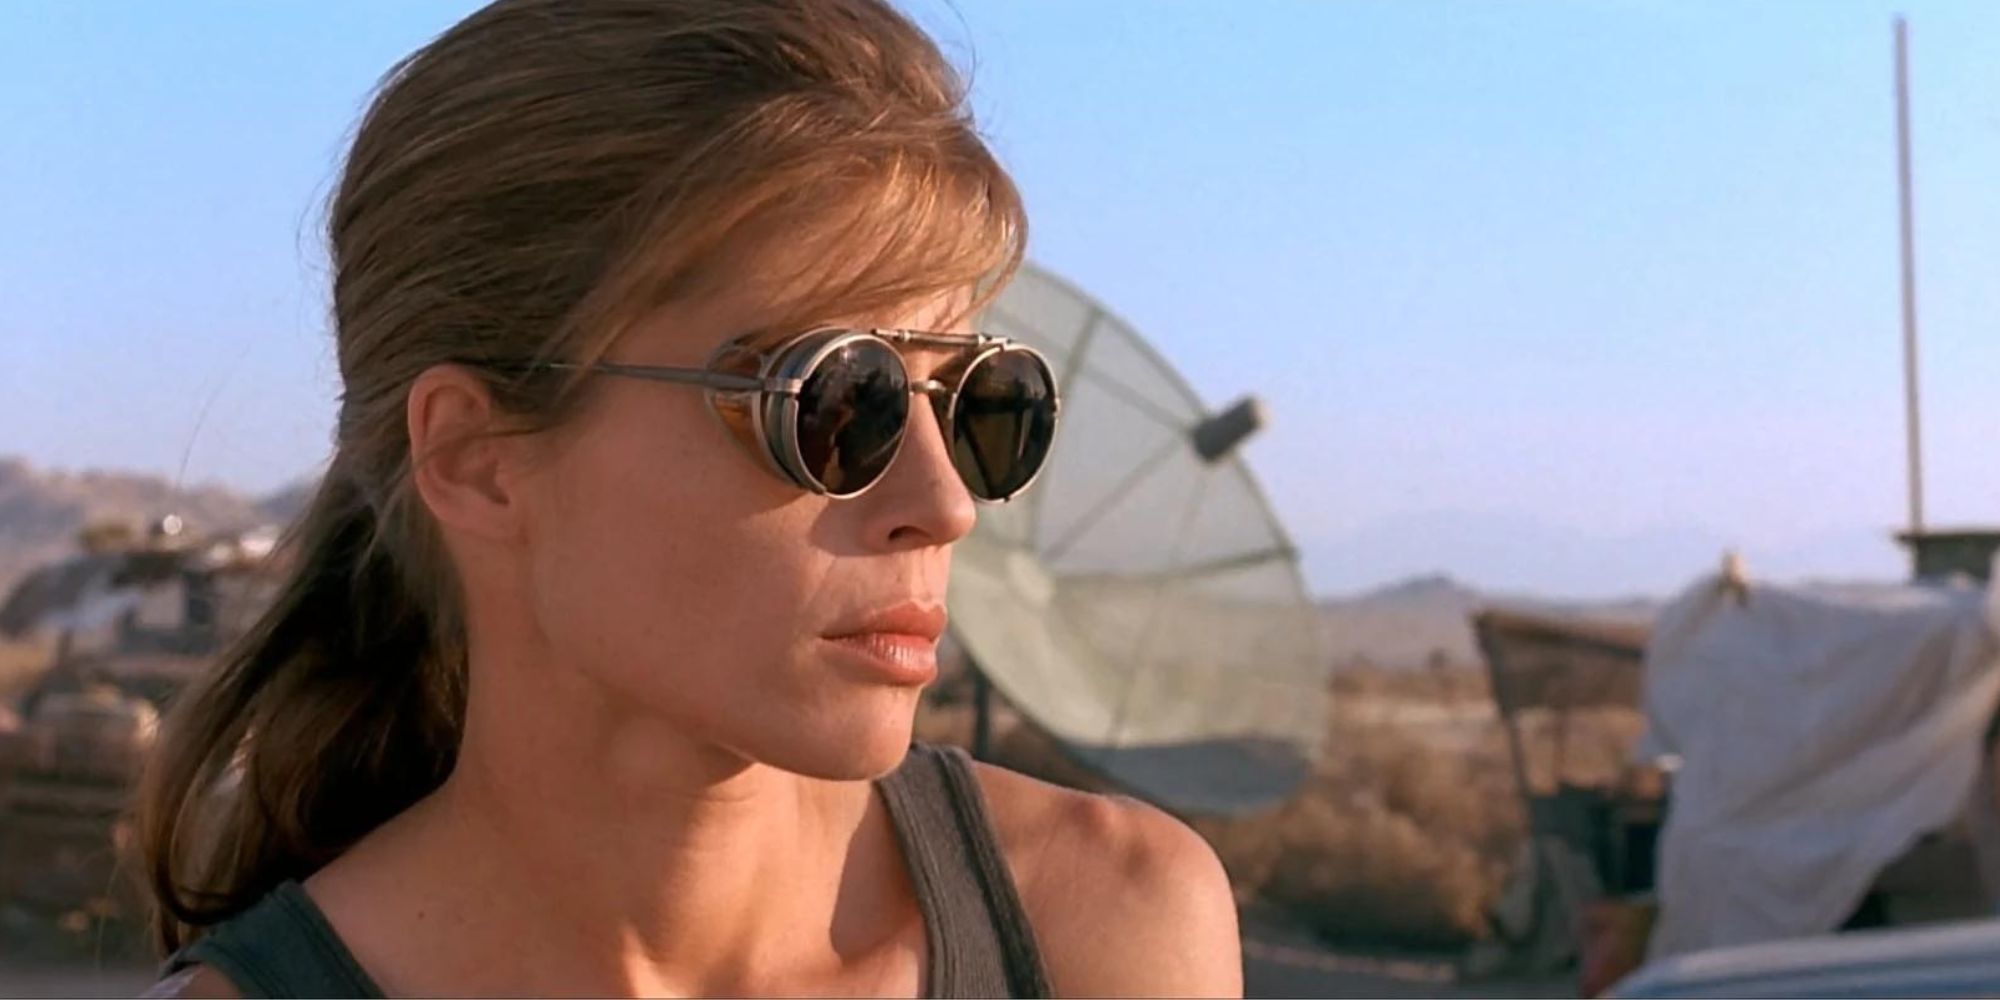 Sarah Connor wearing sunglasses in the desert